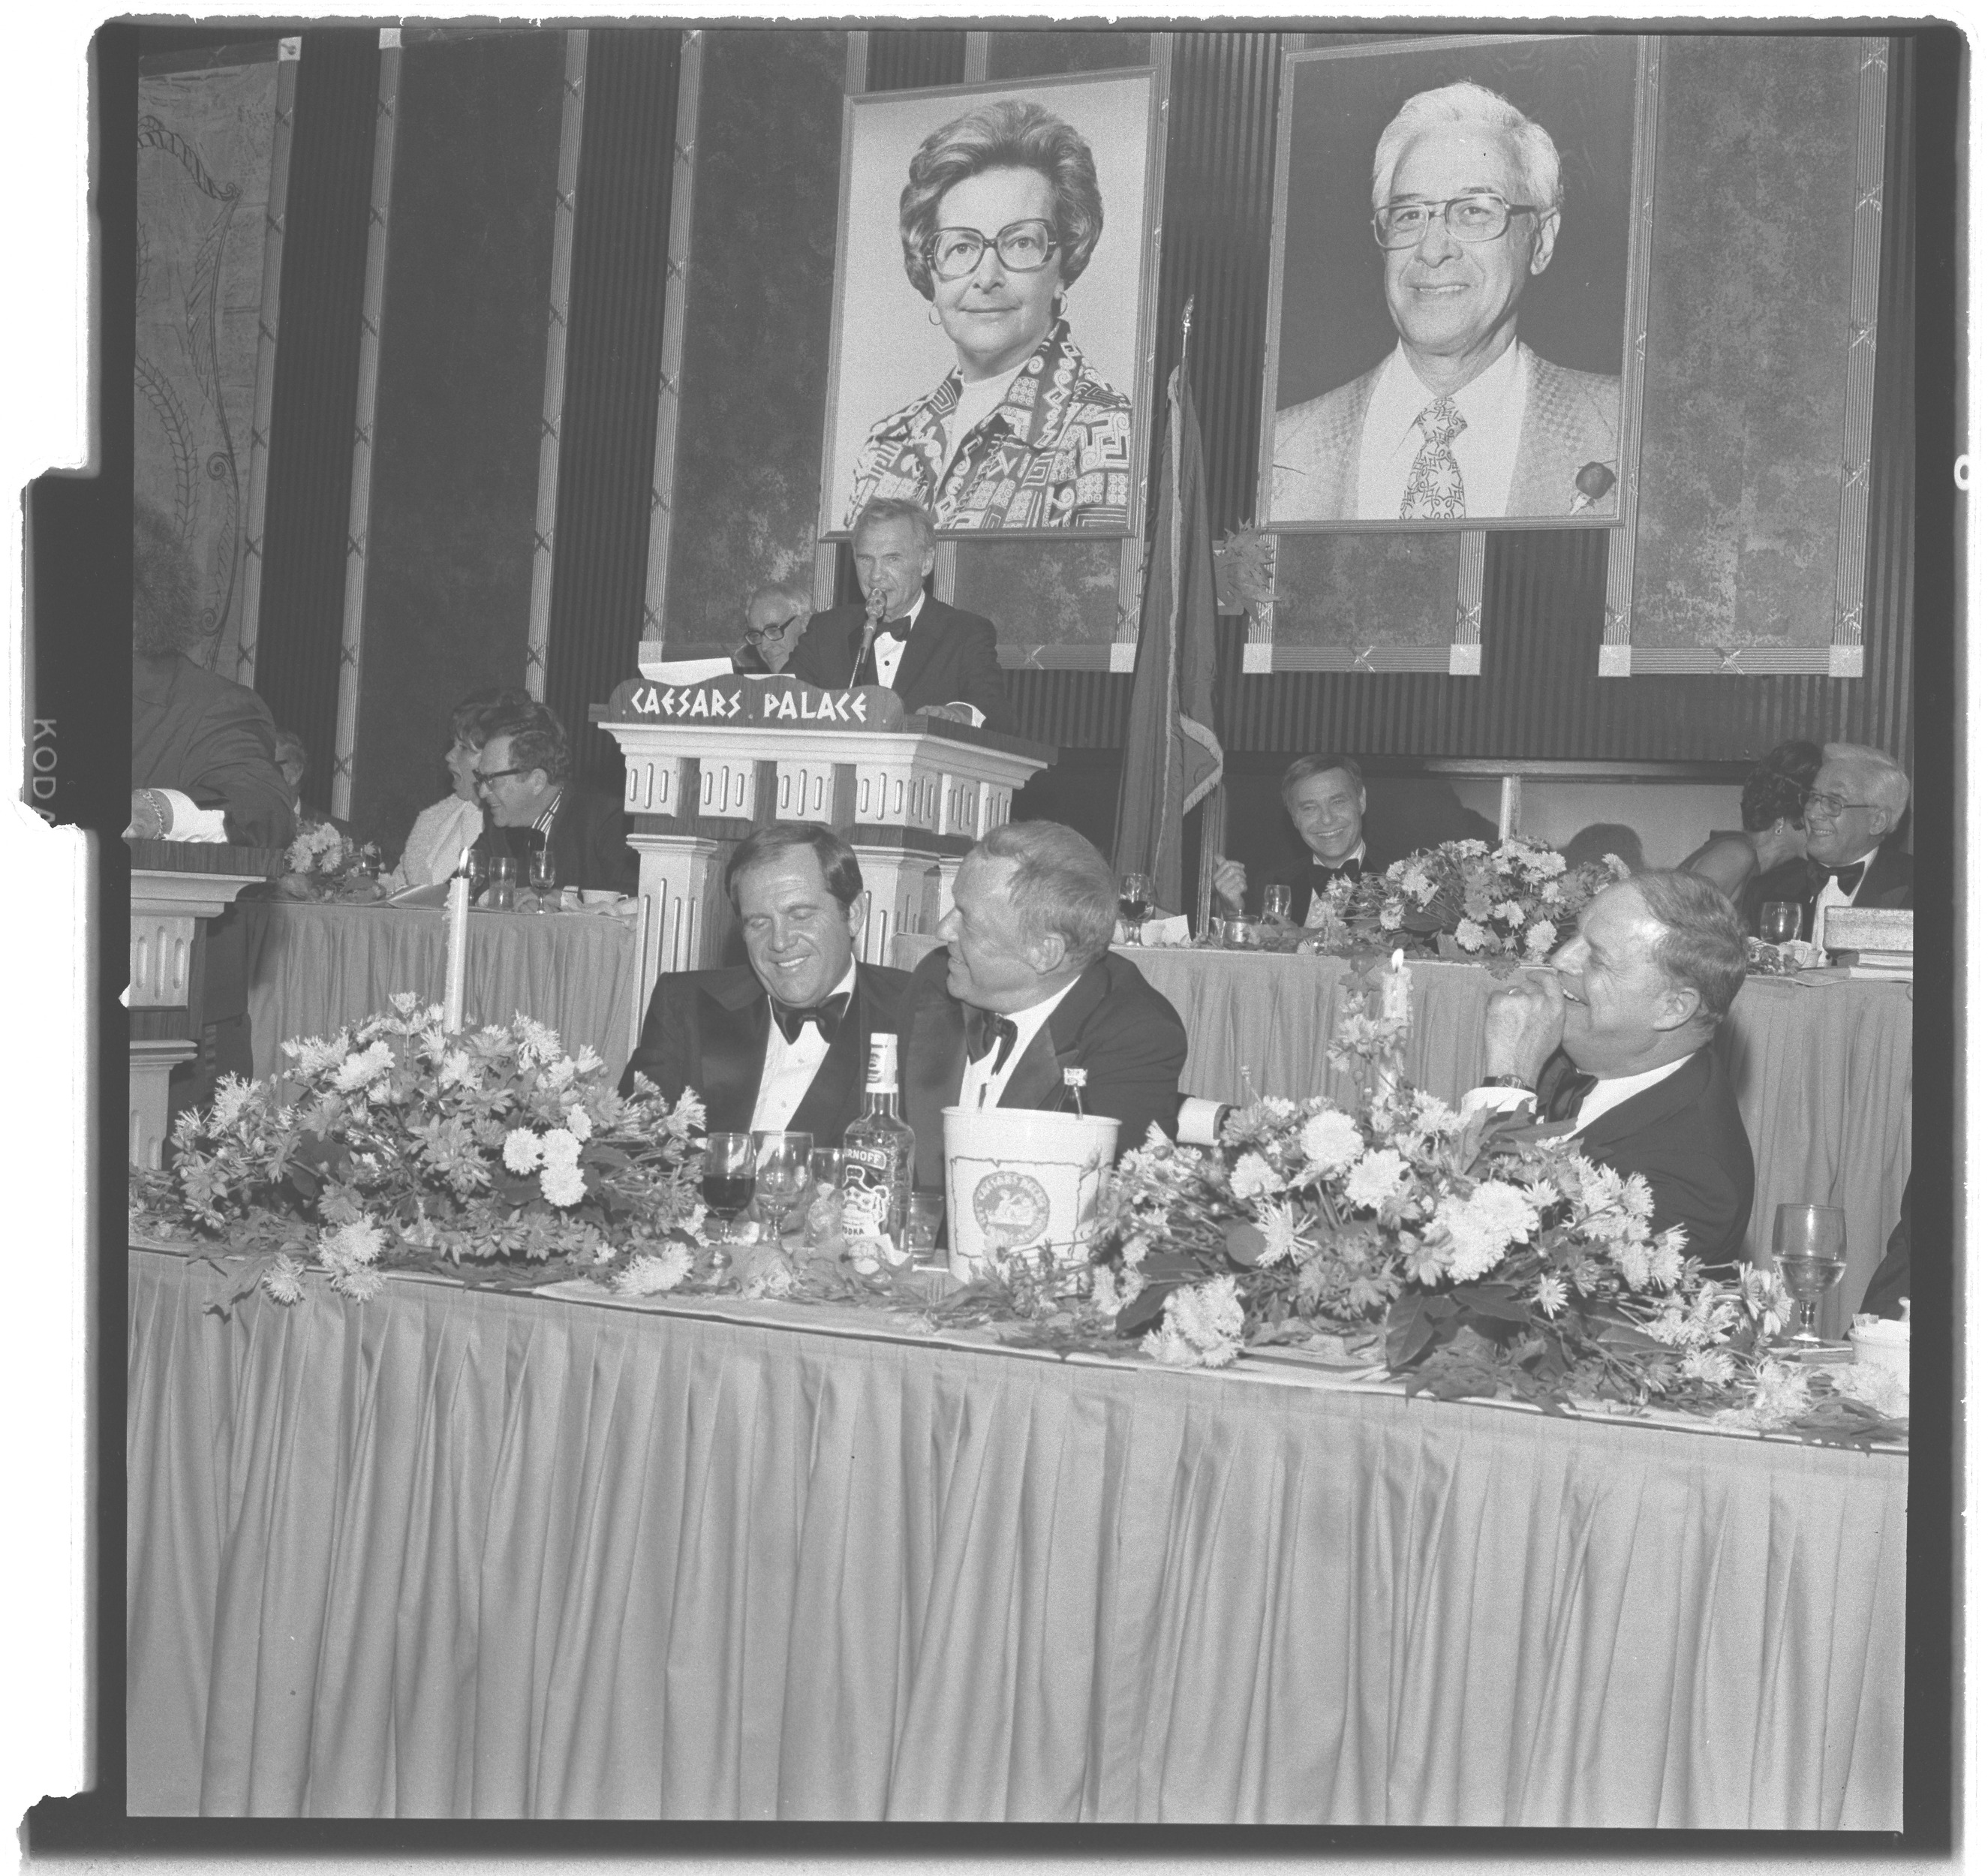 Photographs of the Combined Jewish Appeal Bonds of Israel (Honoring Jean and Billy weinberger), image 09